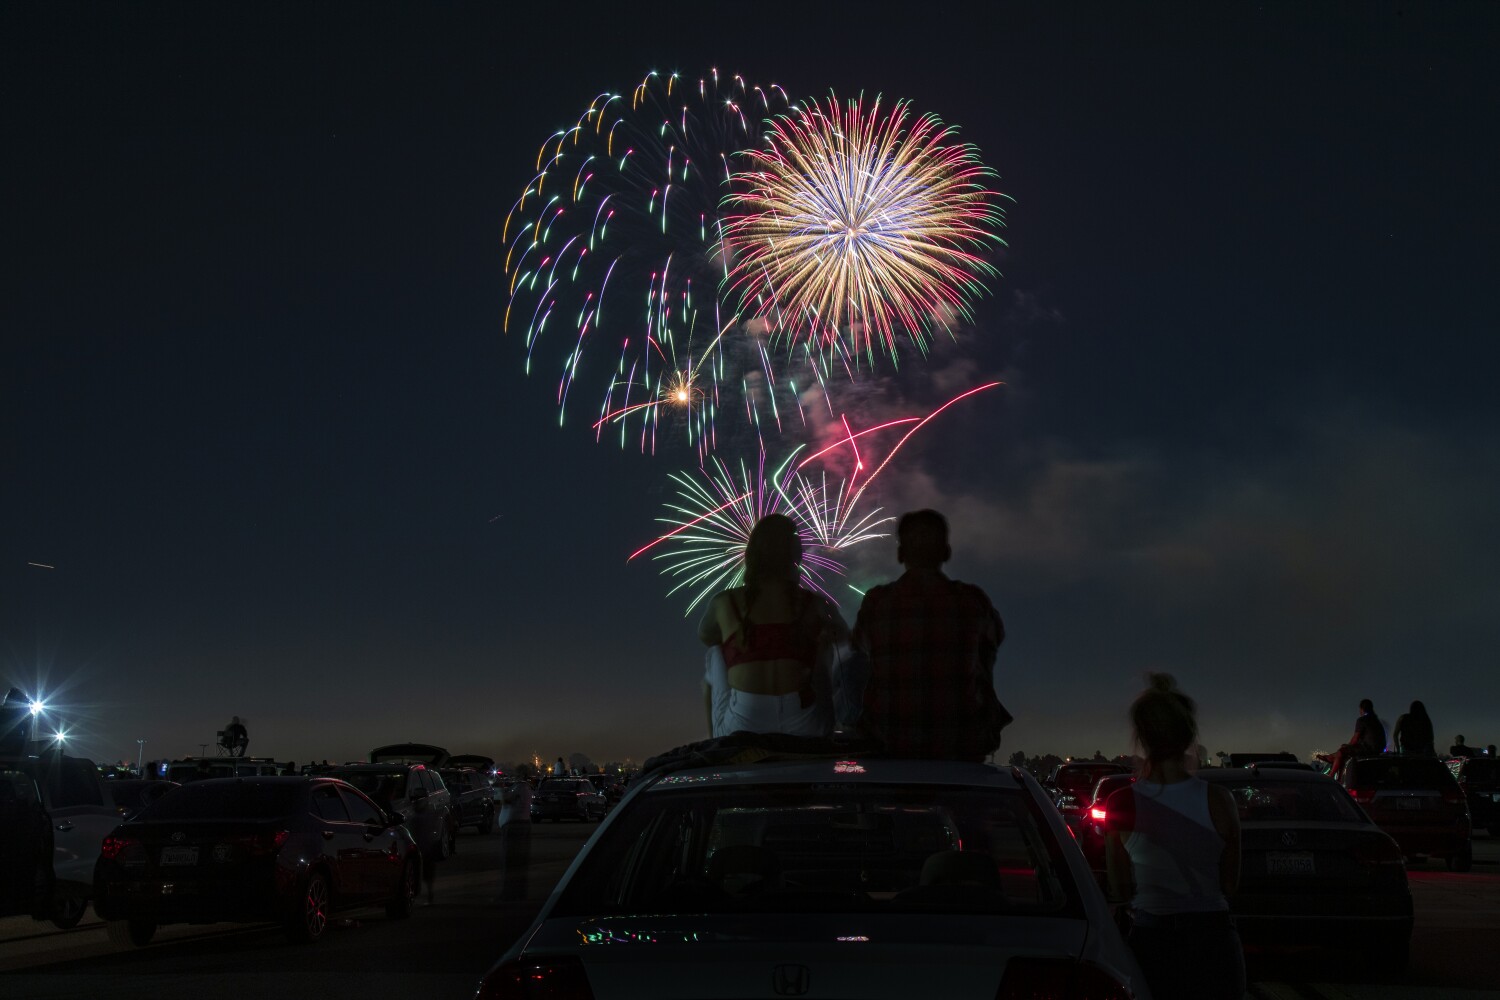 Fireworks safety tips: What to know ahead of the Fourth of July